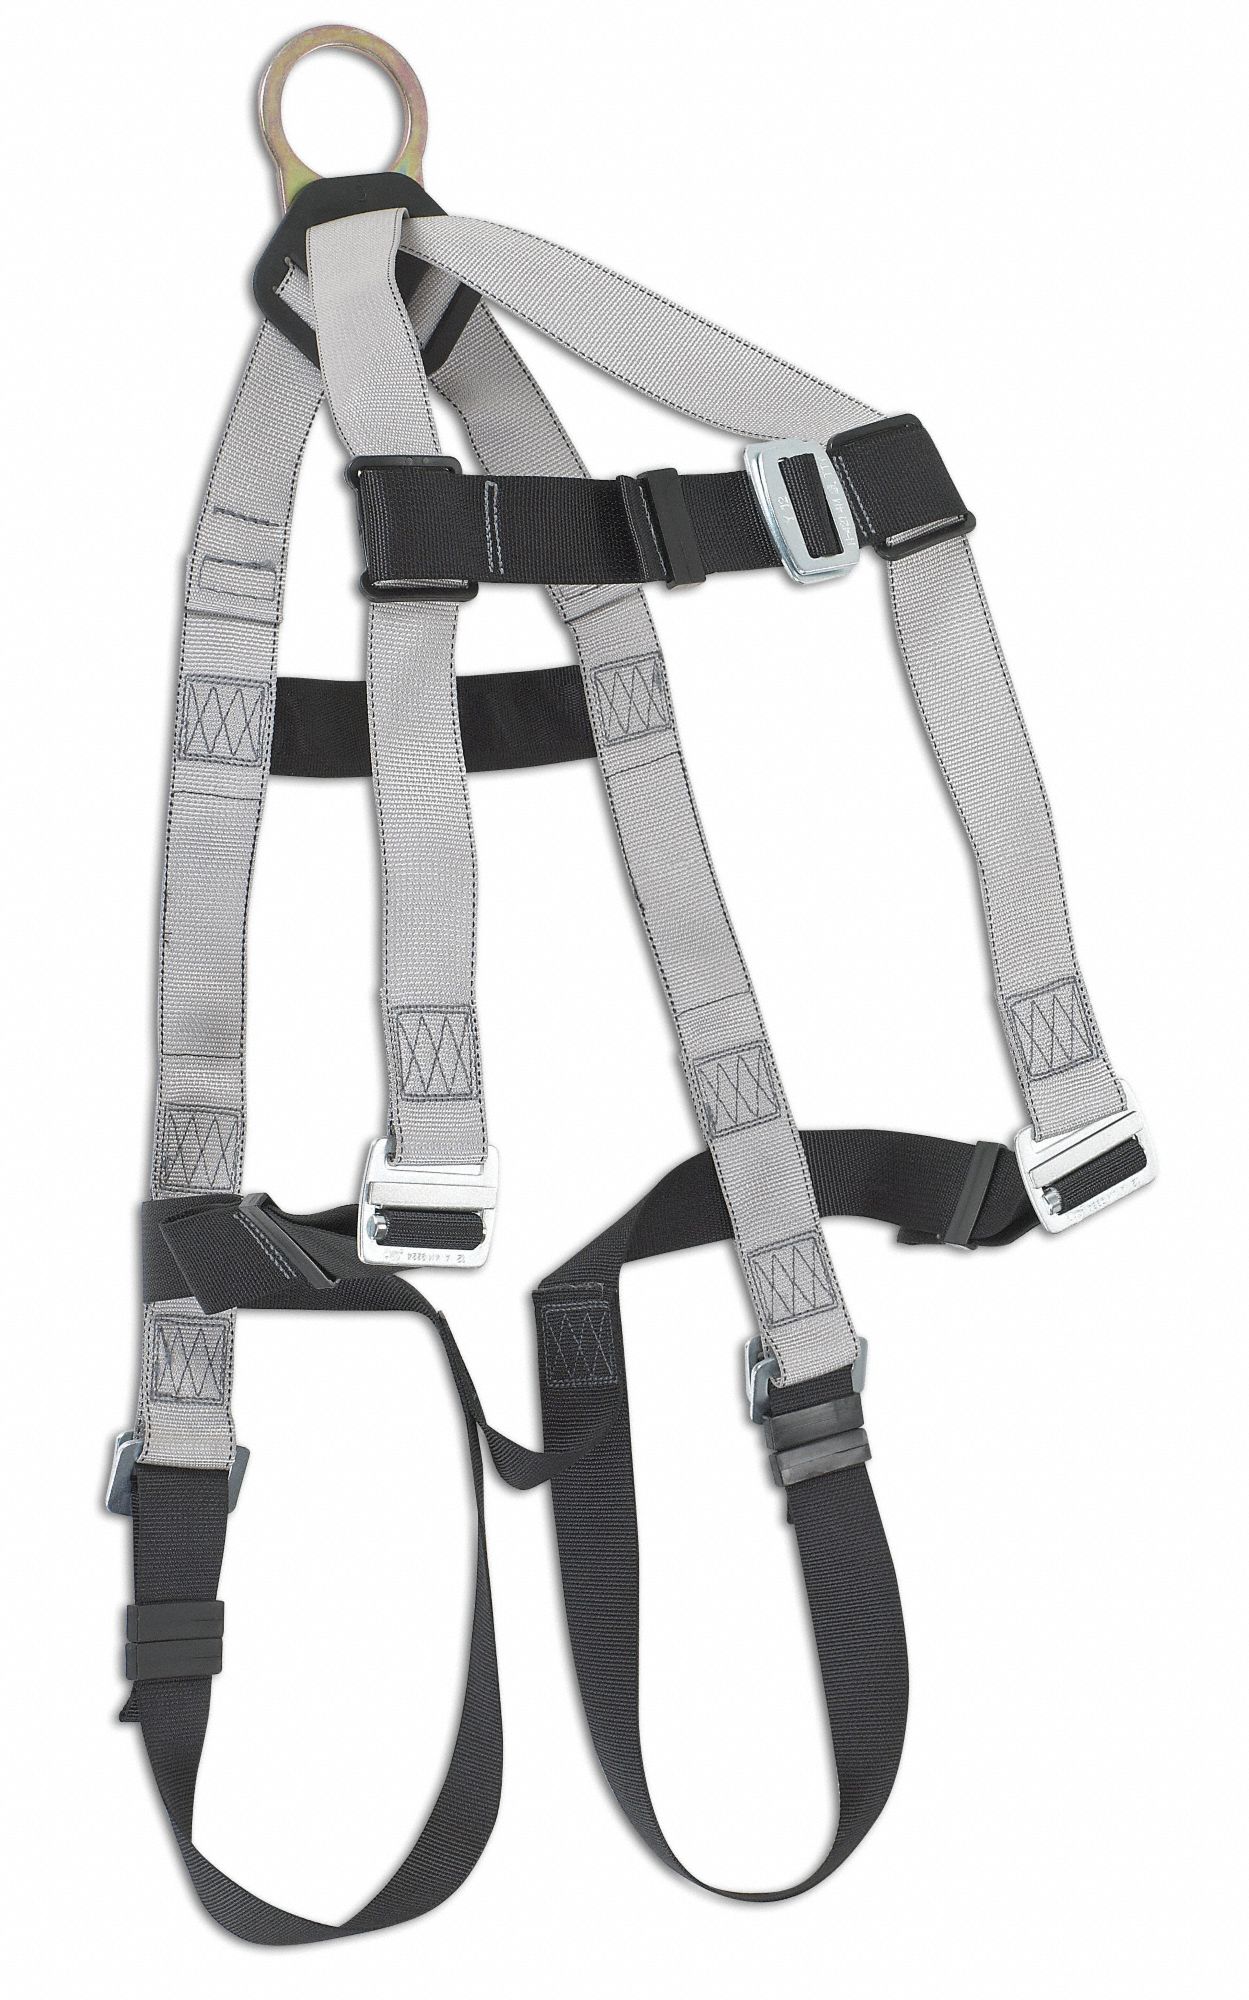 DYNAMIC FULL BODY HARNESS, 5-POINT, 1D, UNIVERSAL, 400 LBS, BACK D-RING -  Safety Harnesses - DSIFP2601DU